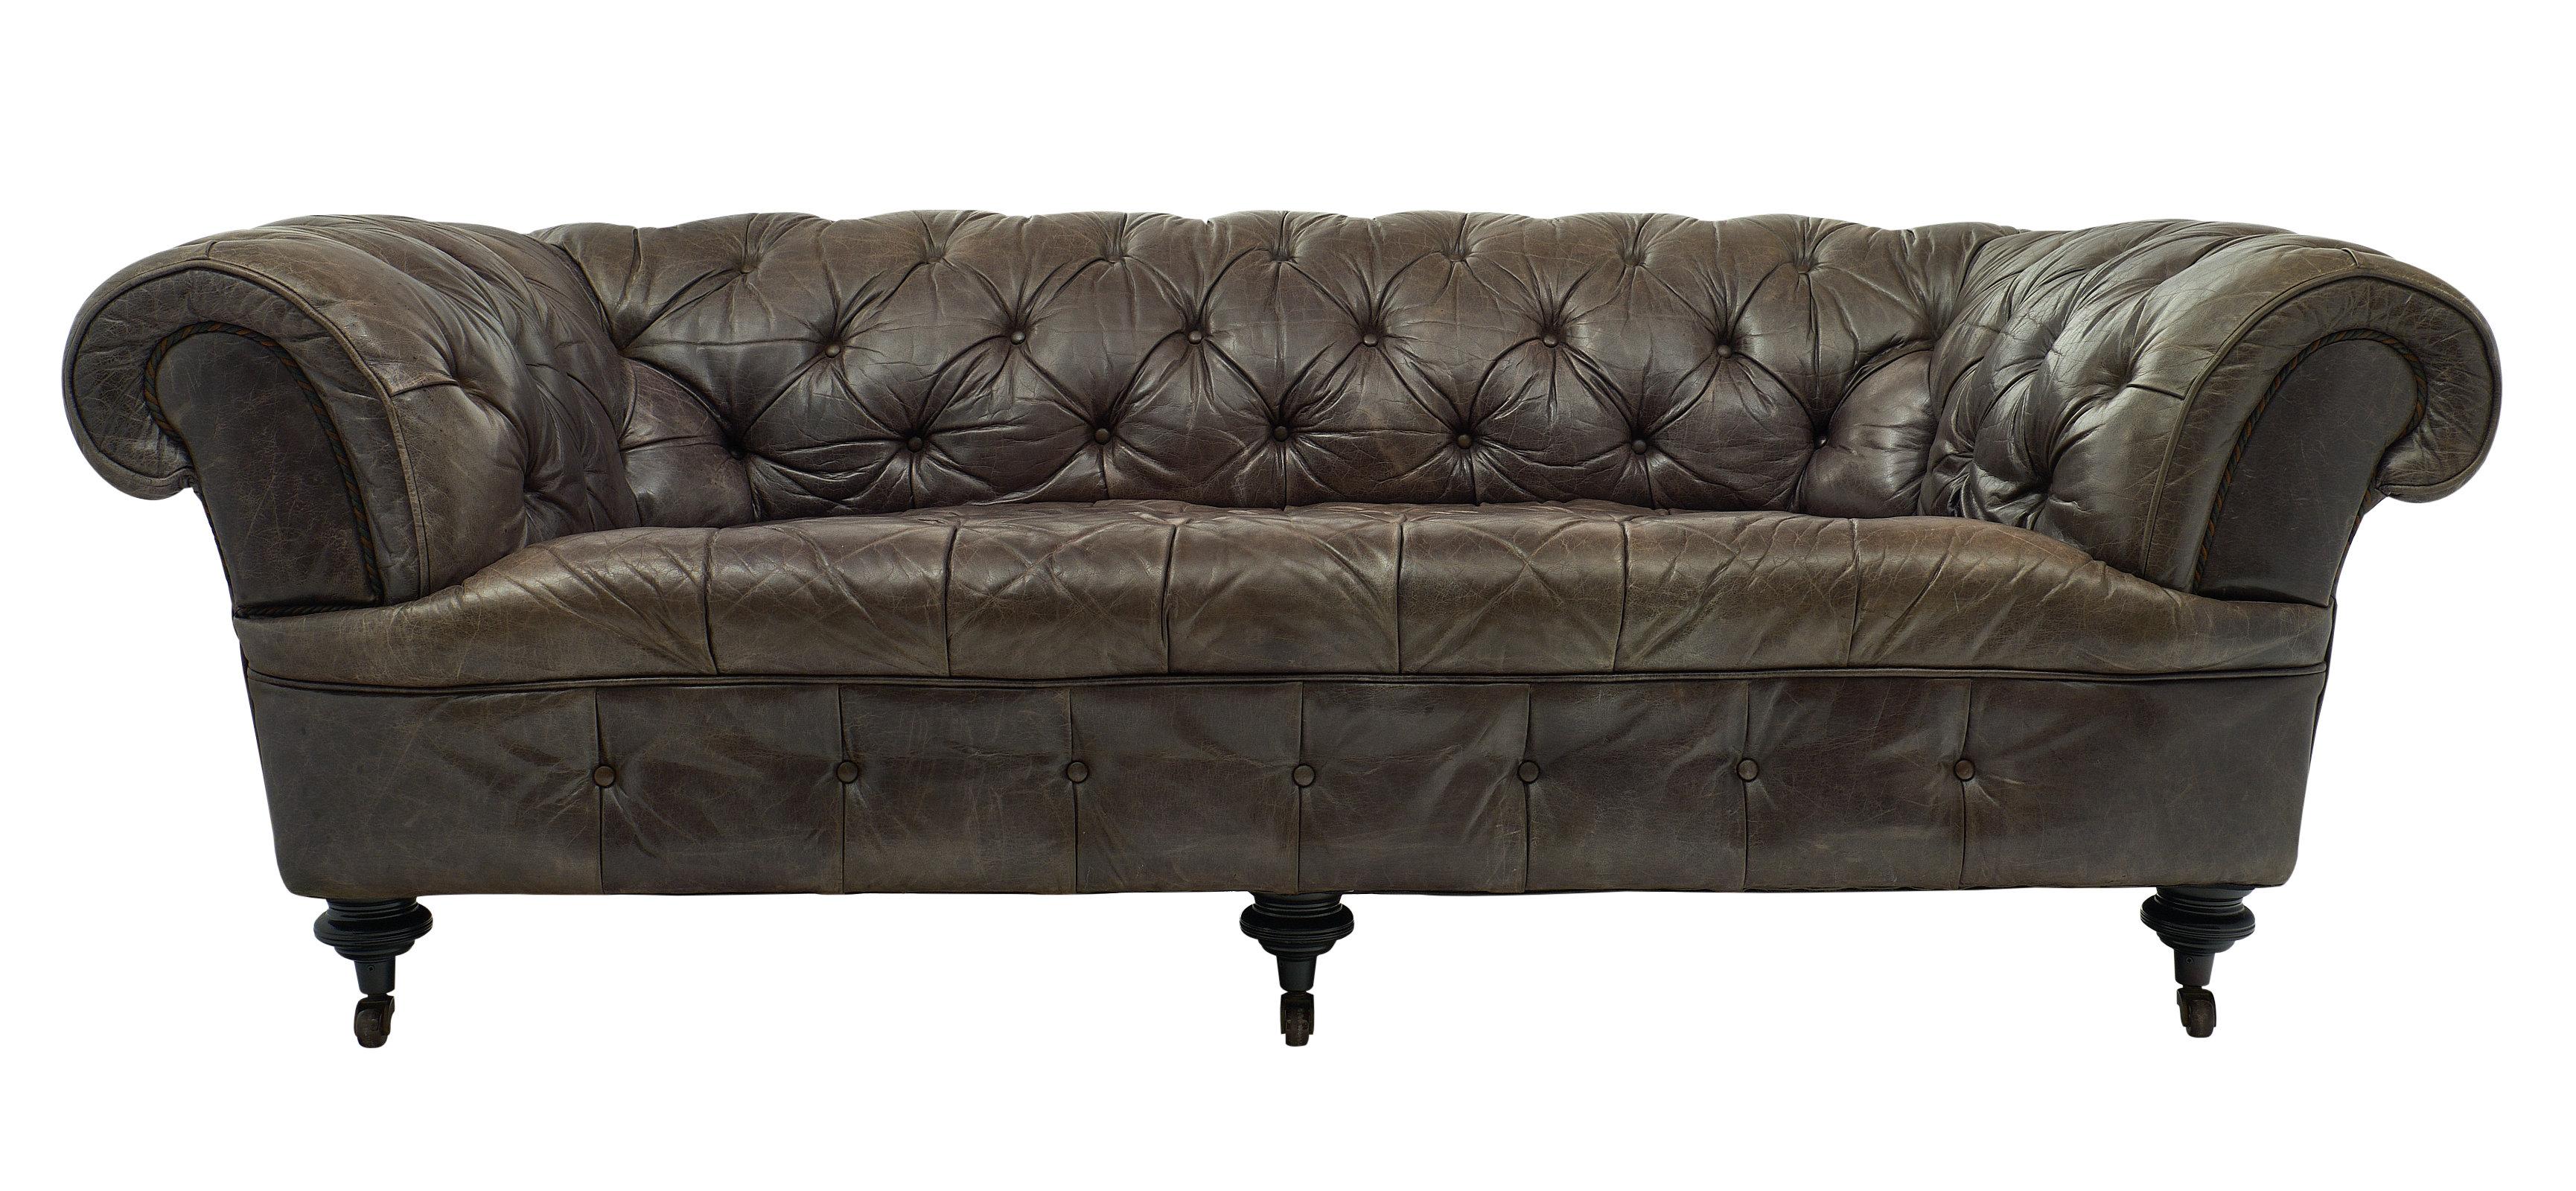 Vintage gray leather chesterfield sofa on ebonized feet with casters. We love the deep seat on this very comfortable piece, as well as the classic details.